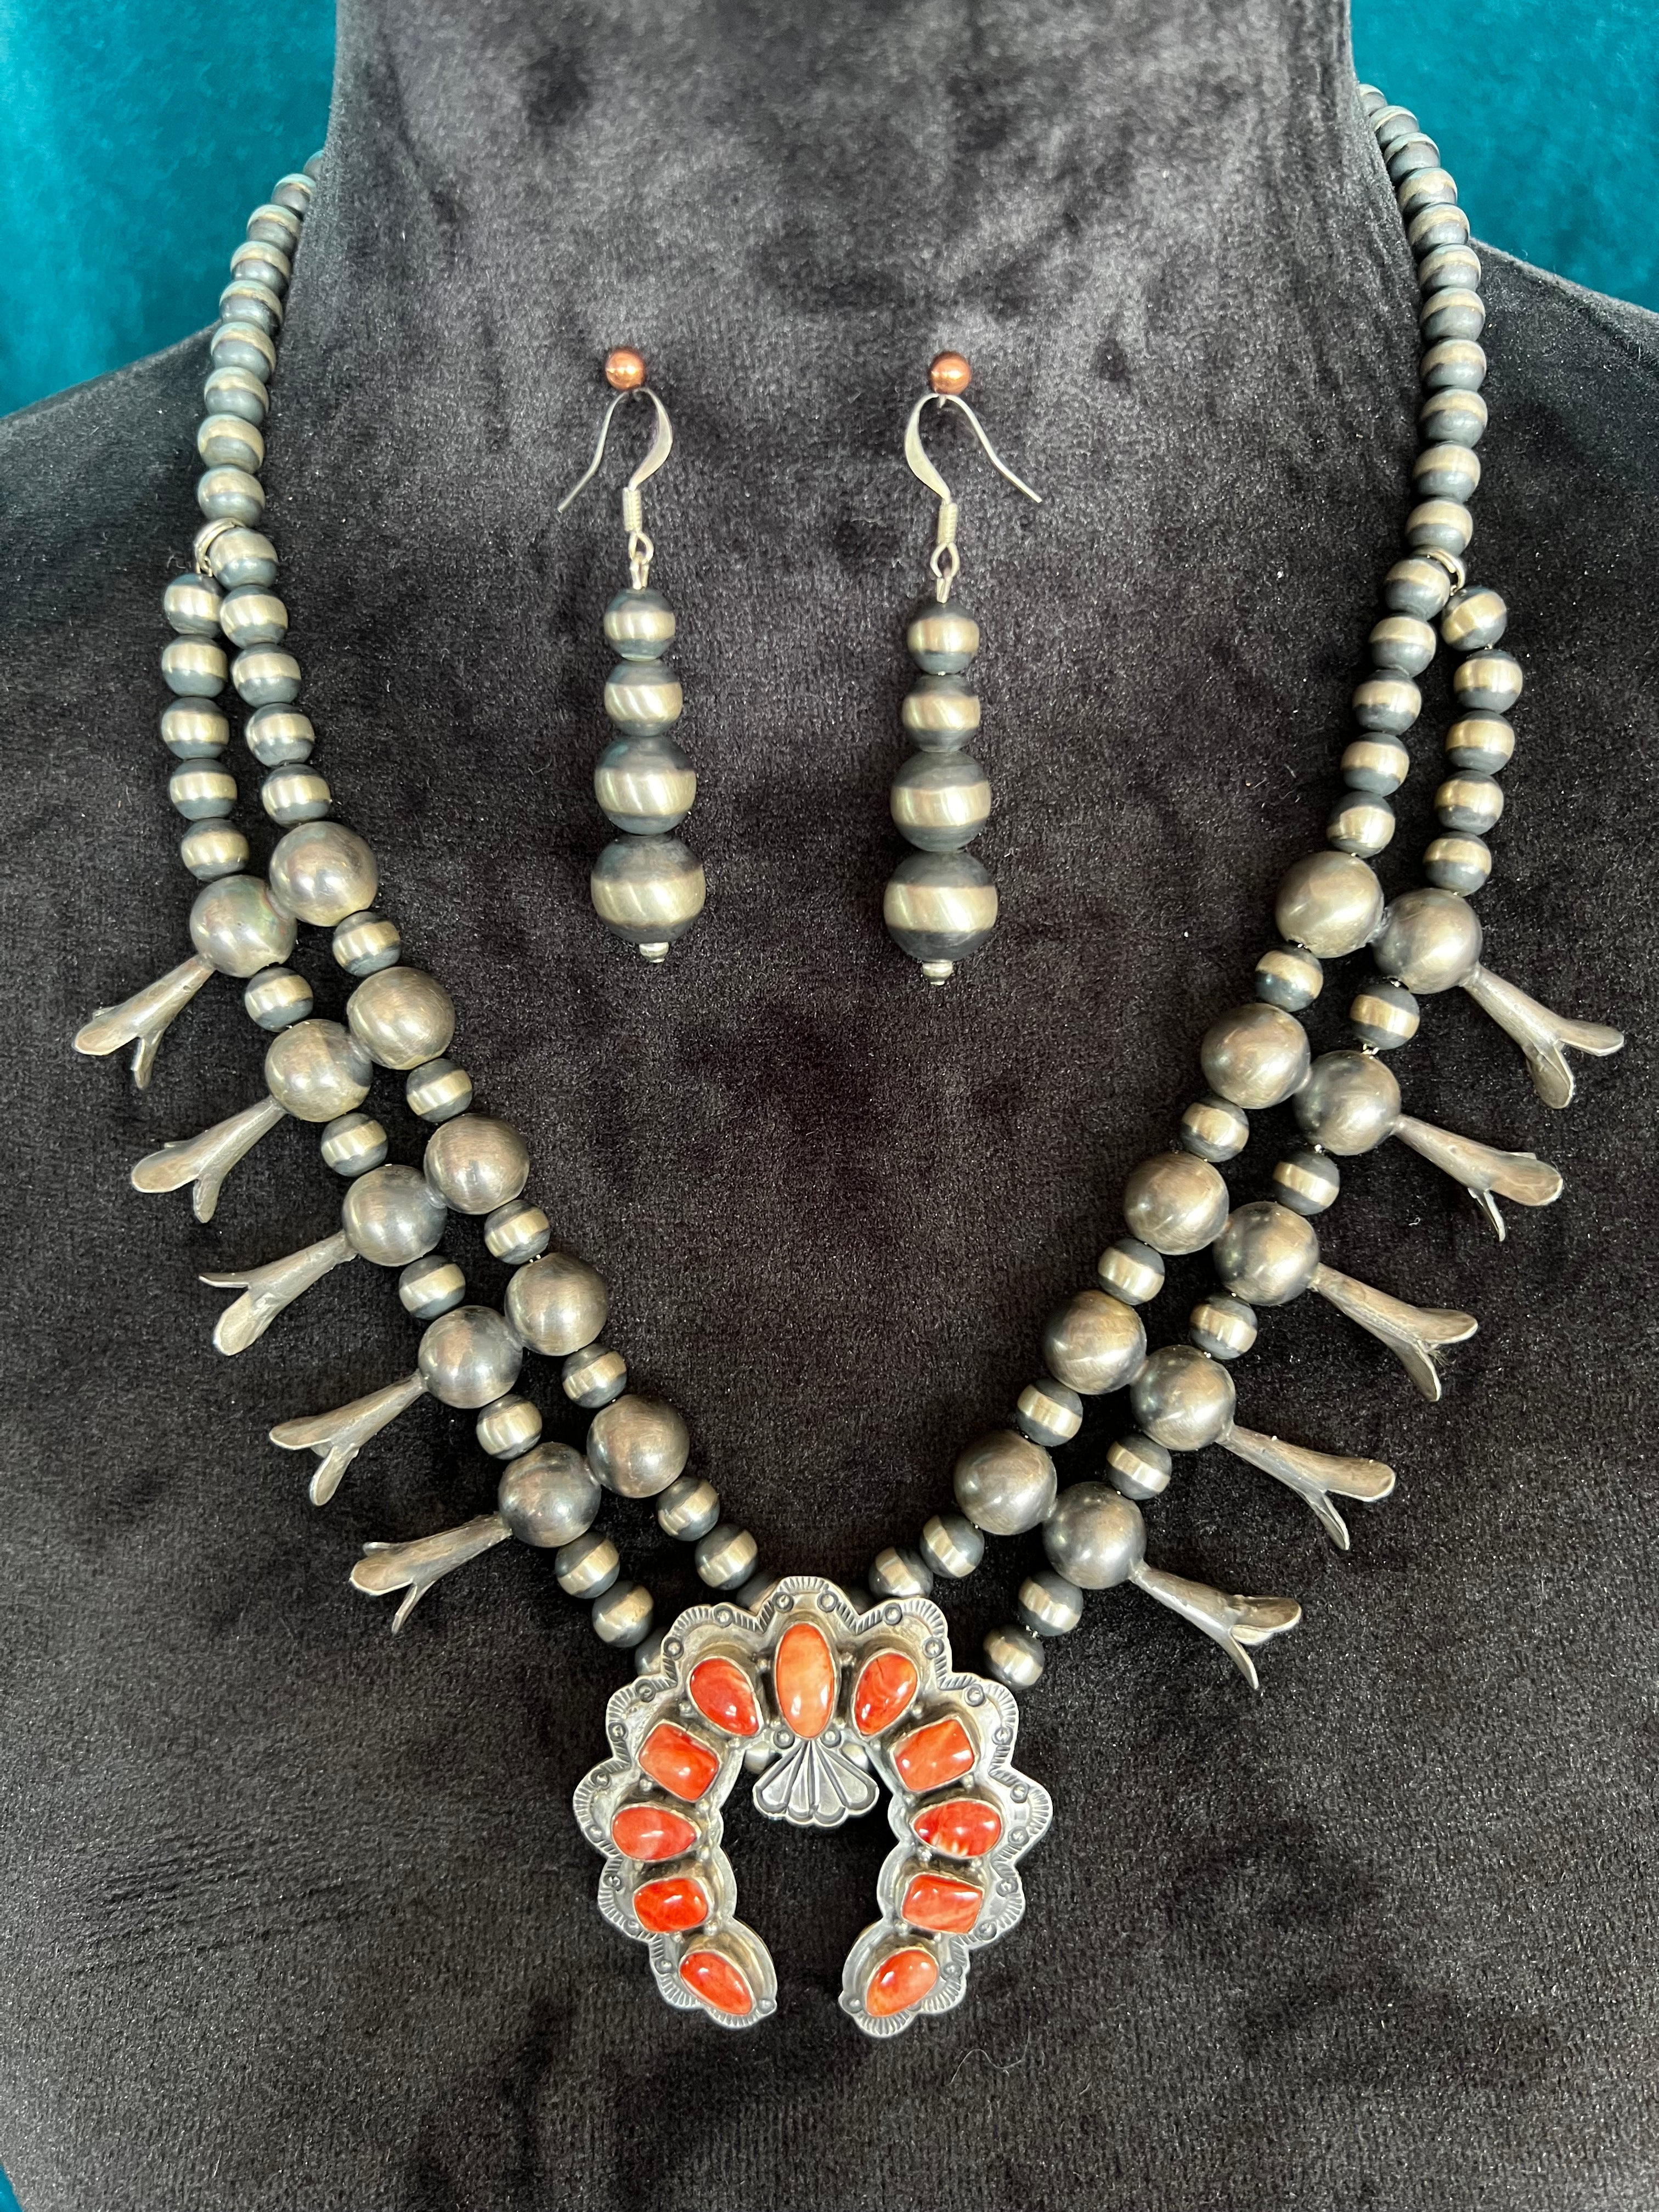 Navajo Sterling silver red coral squash blossom necklace.  #nativeamericanjewelry #navajo #oneofakind #unique #handmade #turquoise  #corra... | Instagram